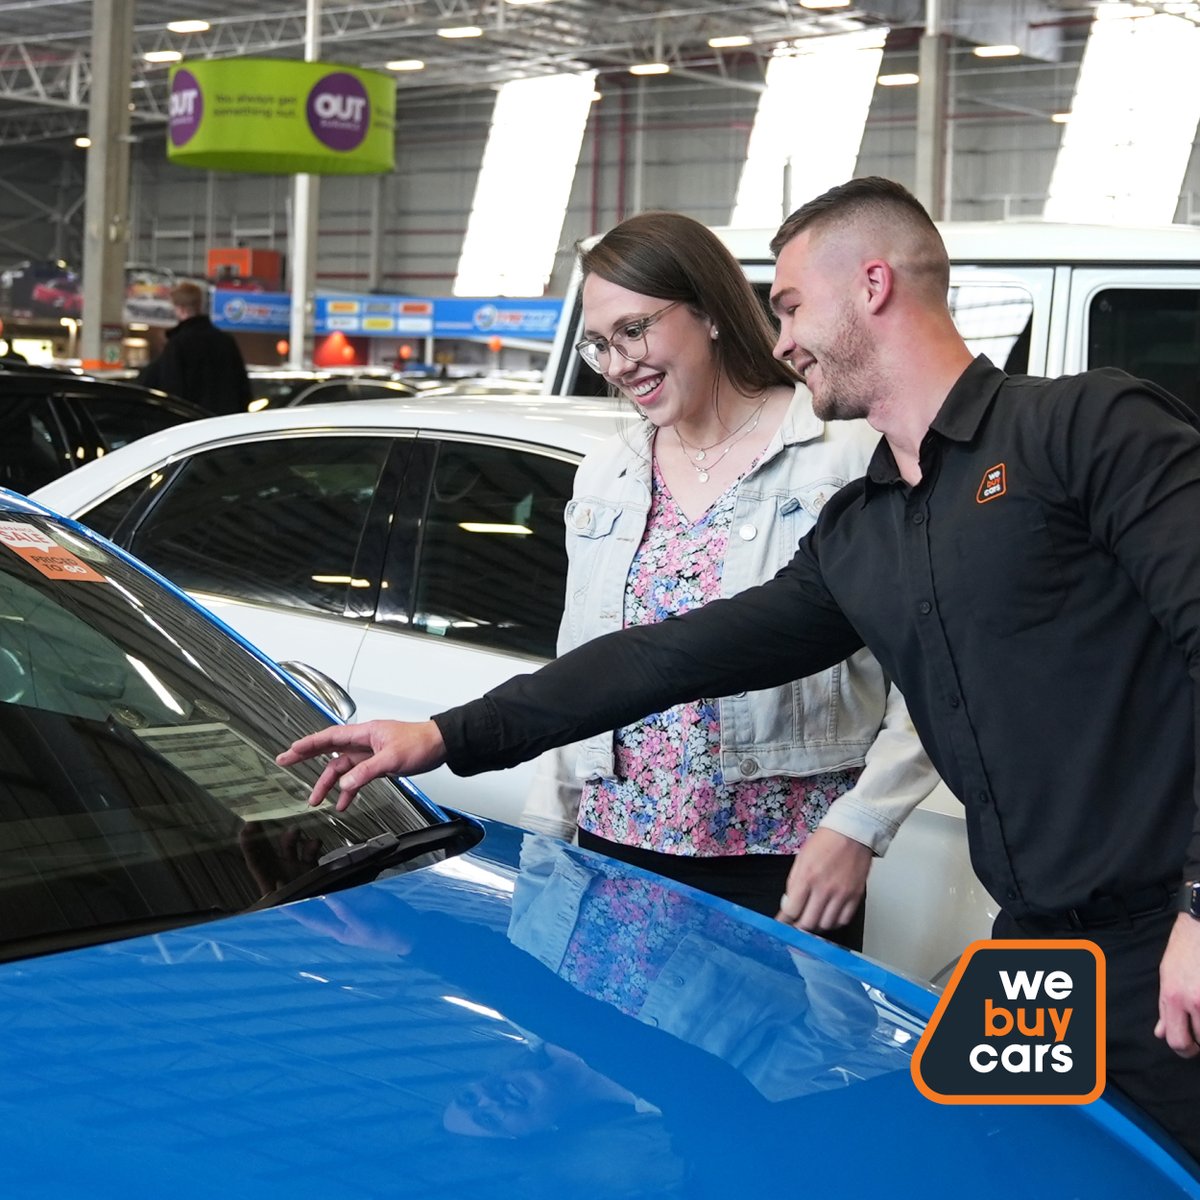 Purchasing a new vehicle can be challenging, but our friendly #WeBuyCars sales executives ensure that this process is as smooth as possible for your convenience 🙌 #carsforsale #preownedcars #usedcars #usedcarsforsale #carshopping